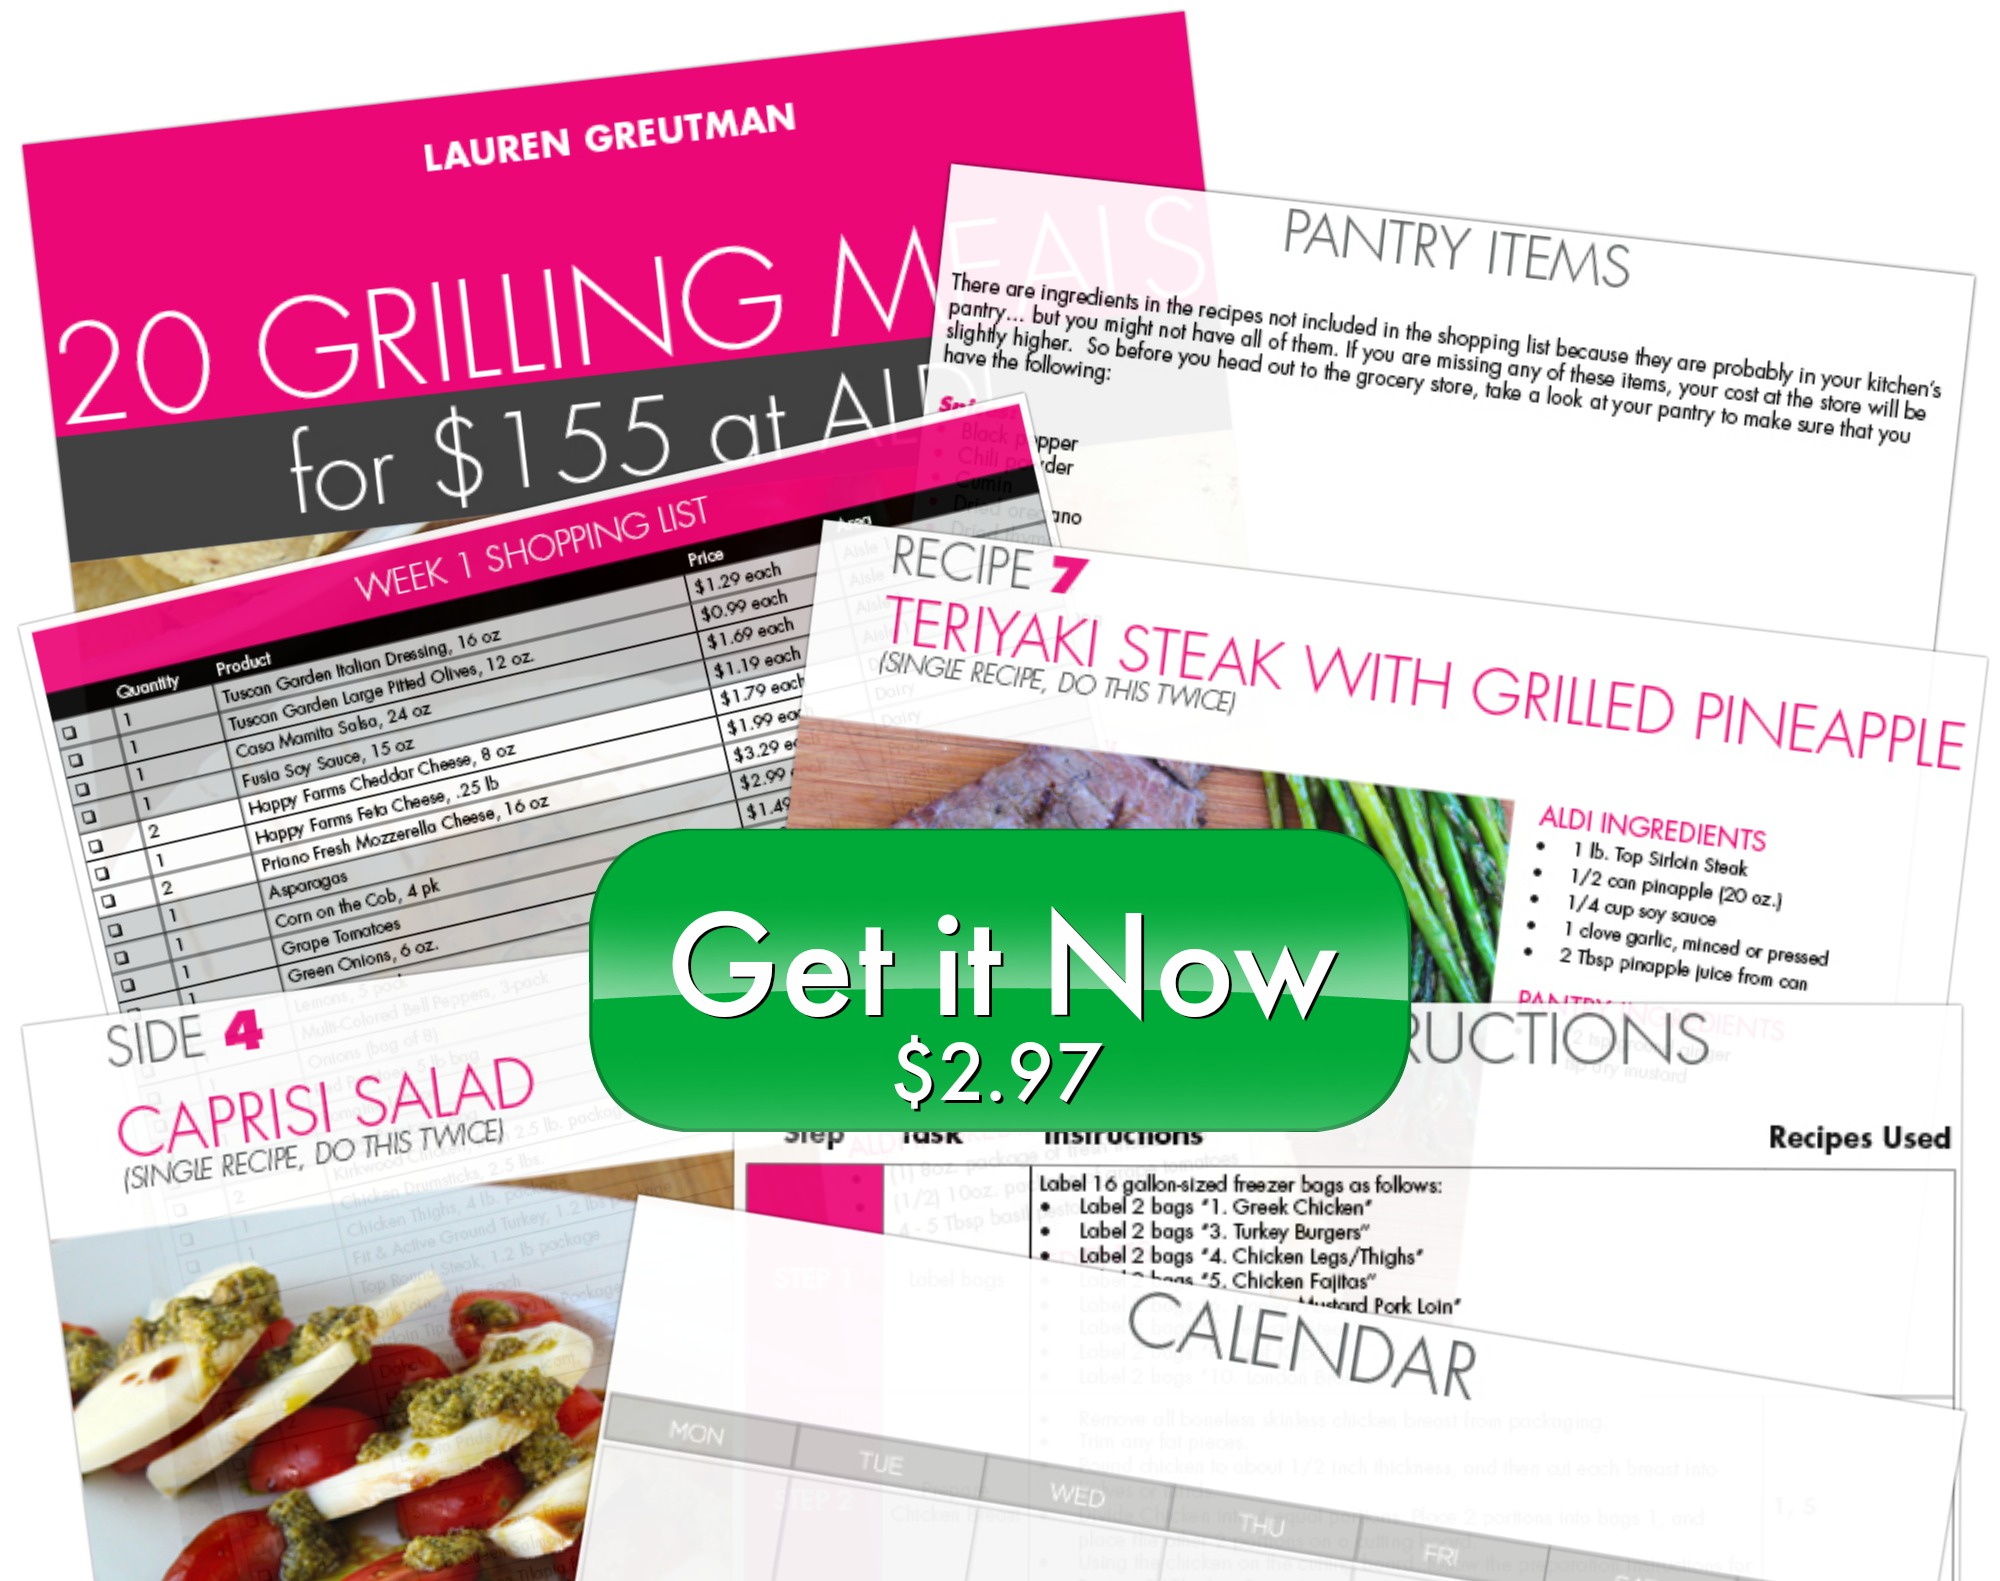 Grilling Plan collage with button and price